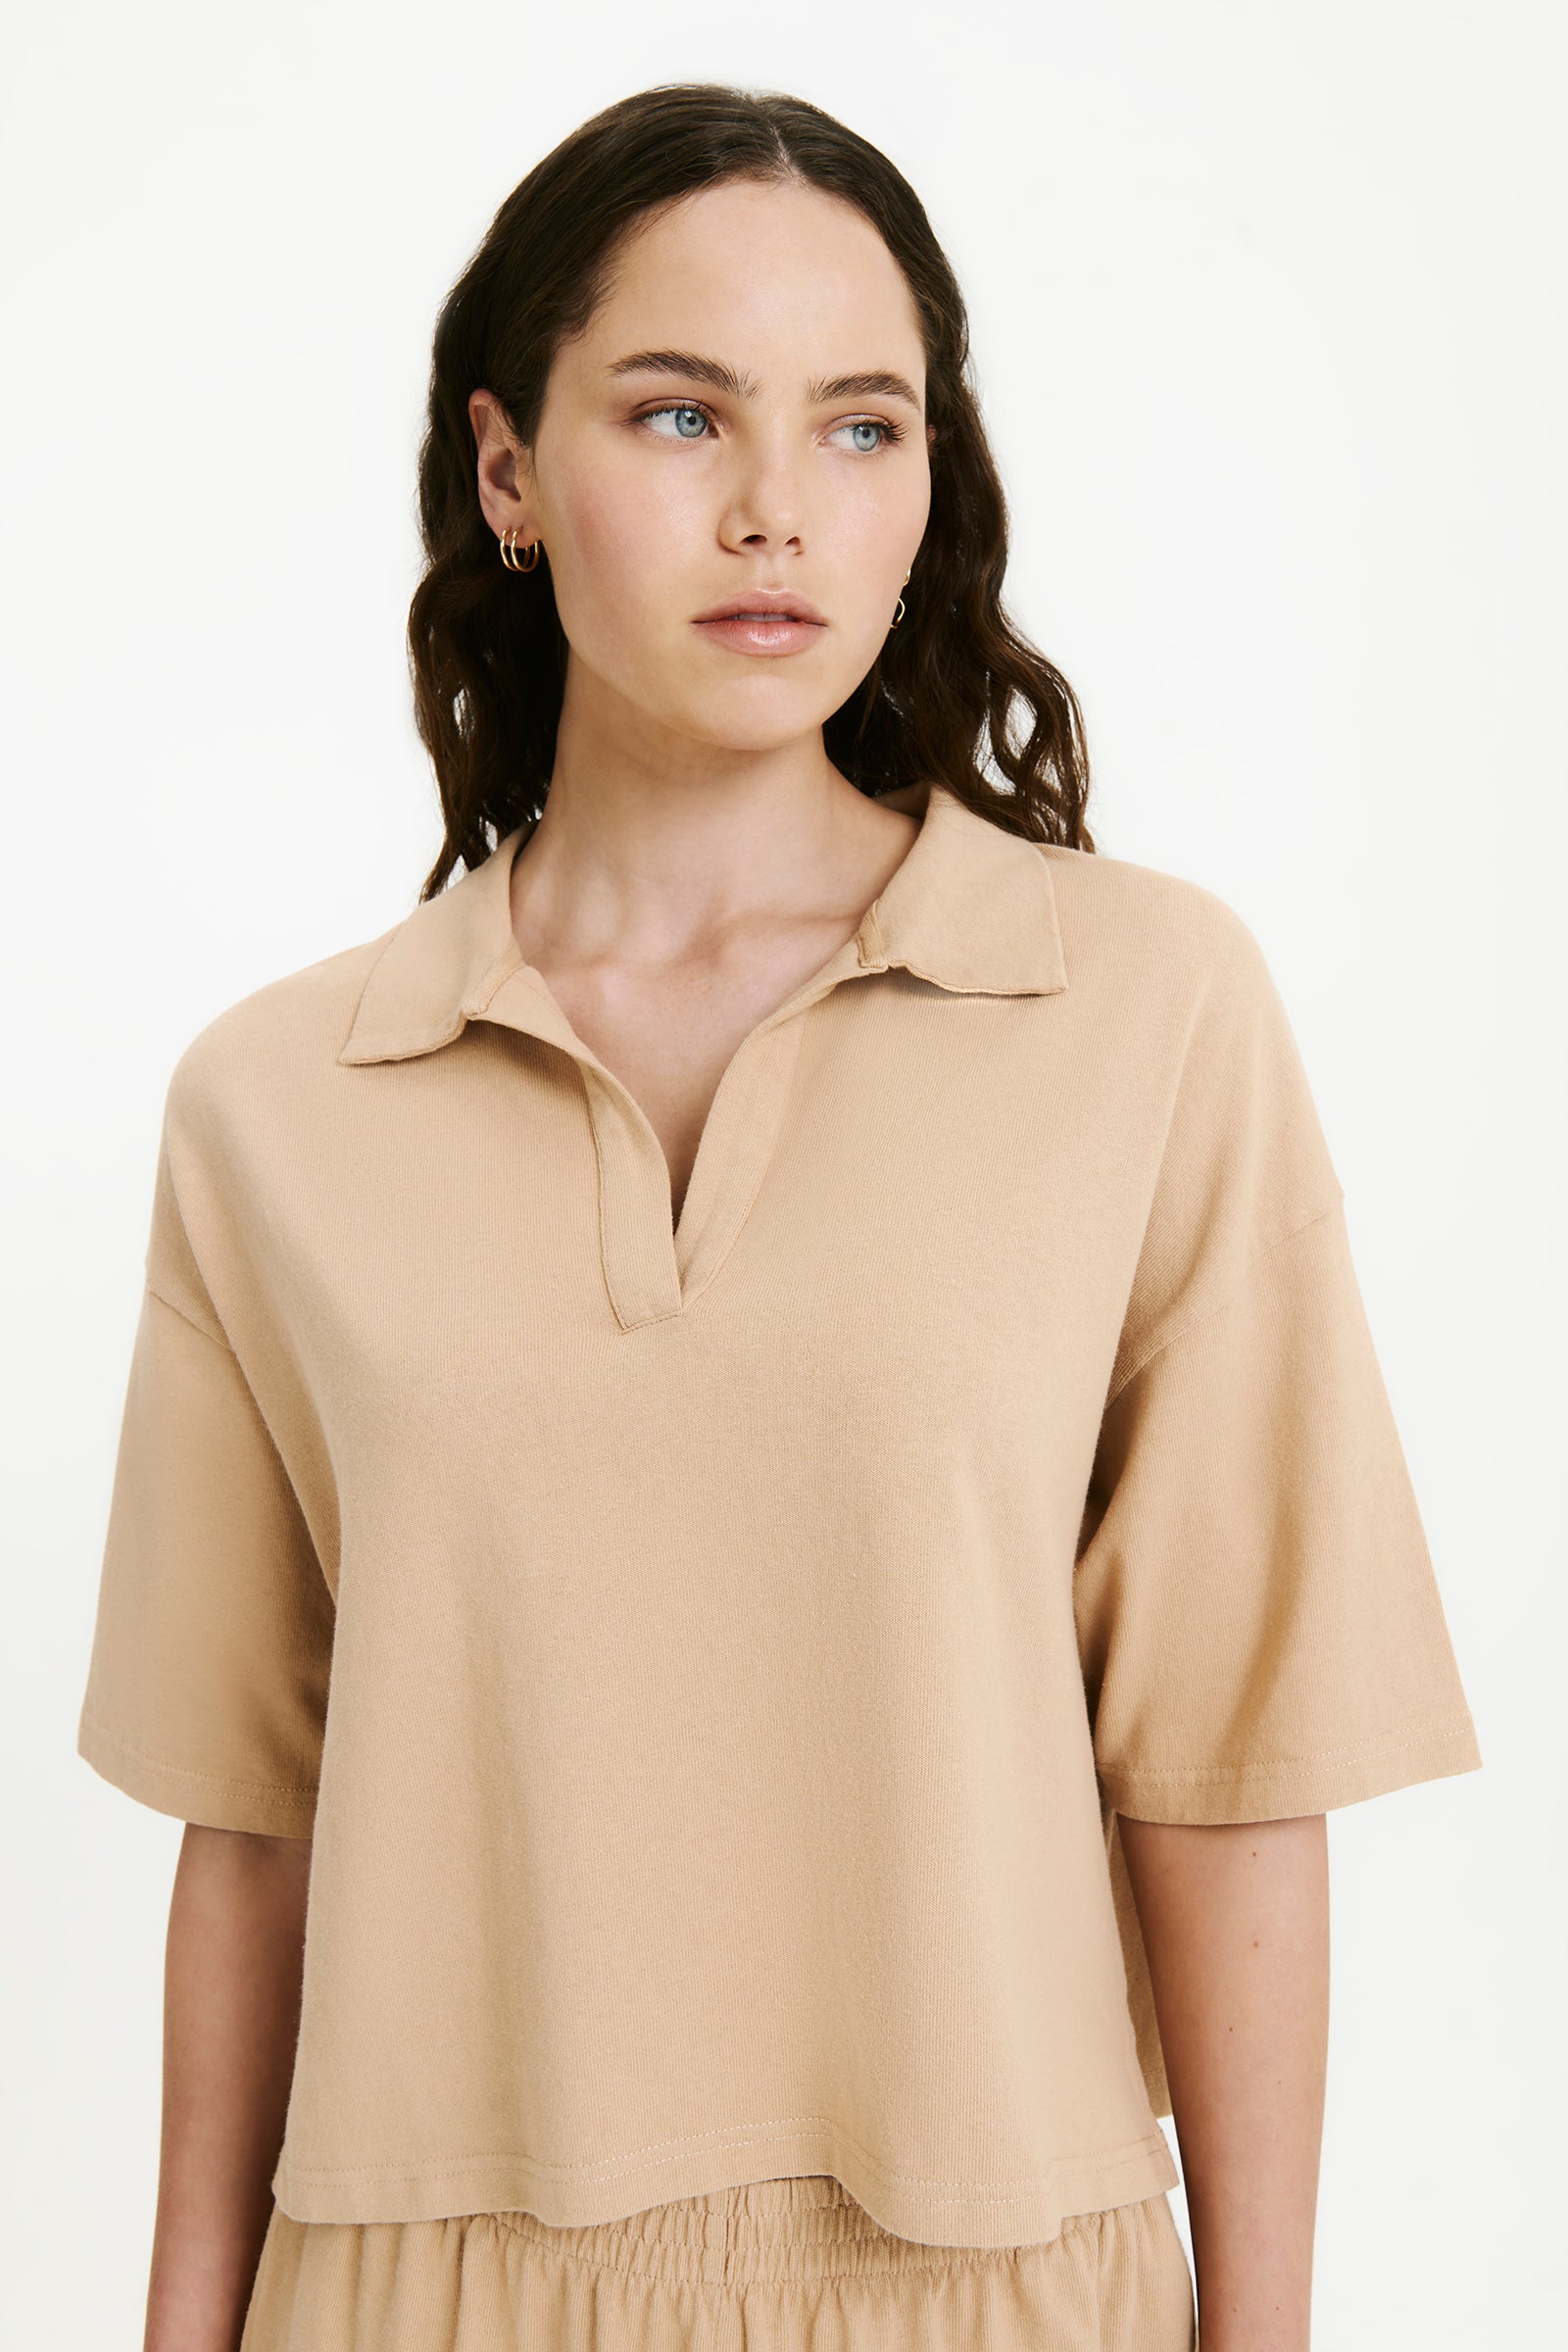 Nude Lucy Fresno Rugby Top In A Light Yellow Toned Dune Colour